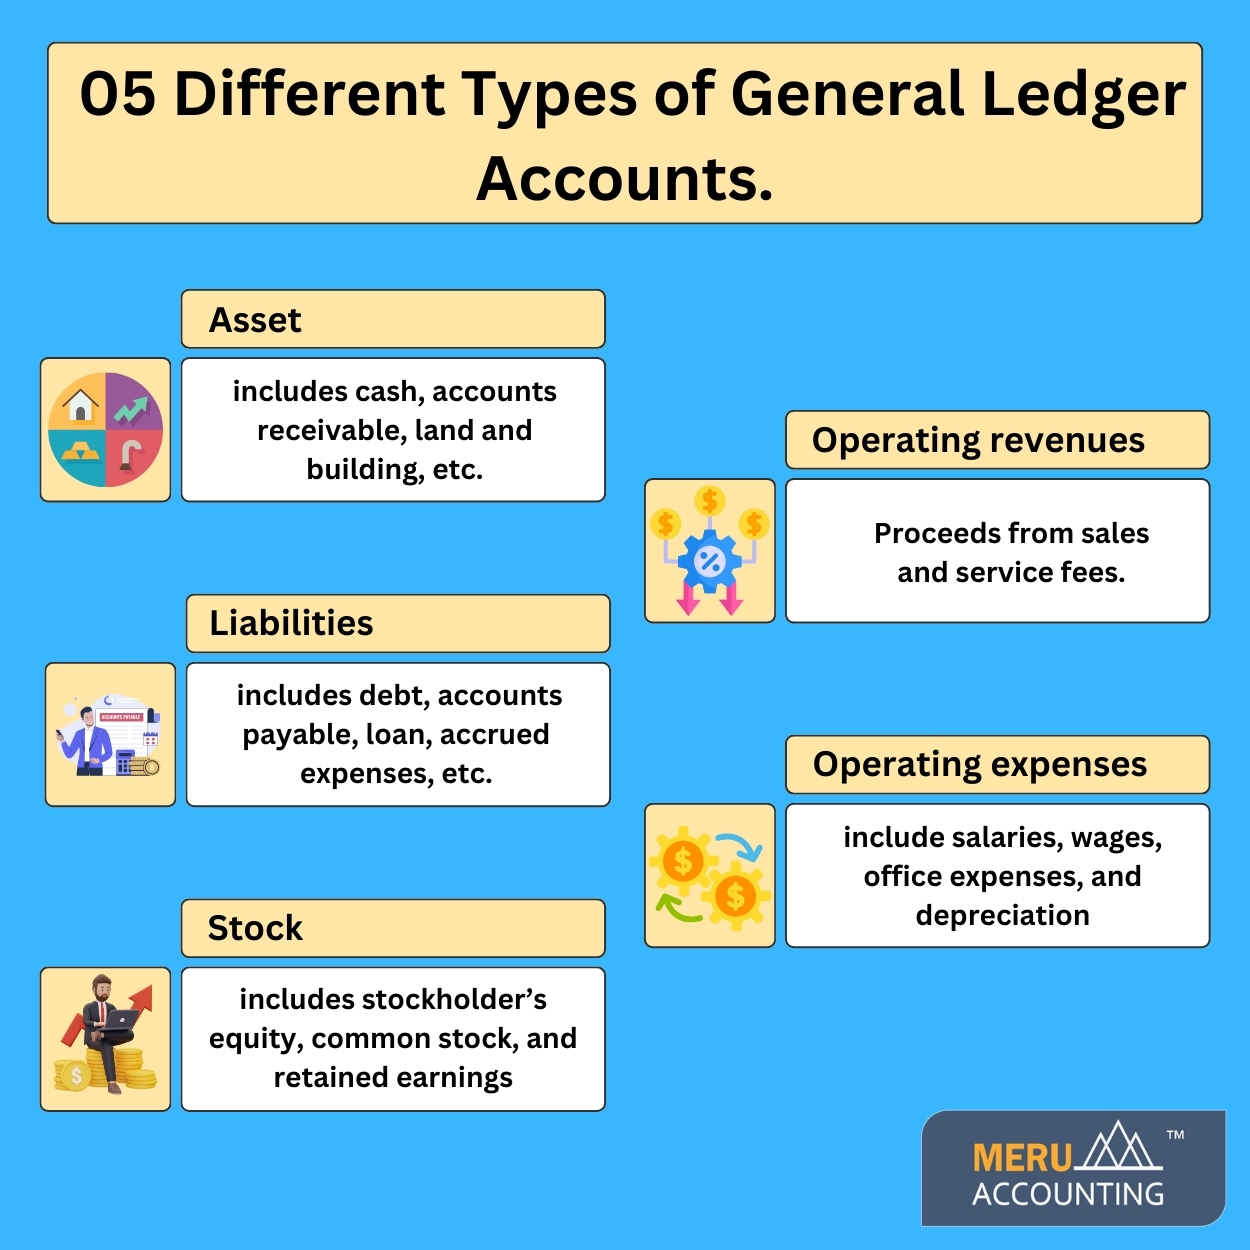 05 Different Types of General Ledger Accounts. size 1250 by 1250 v1